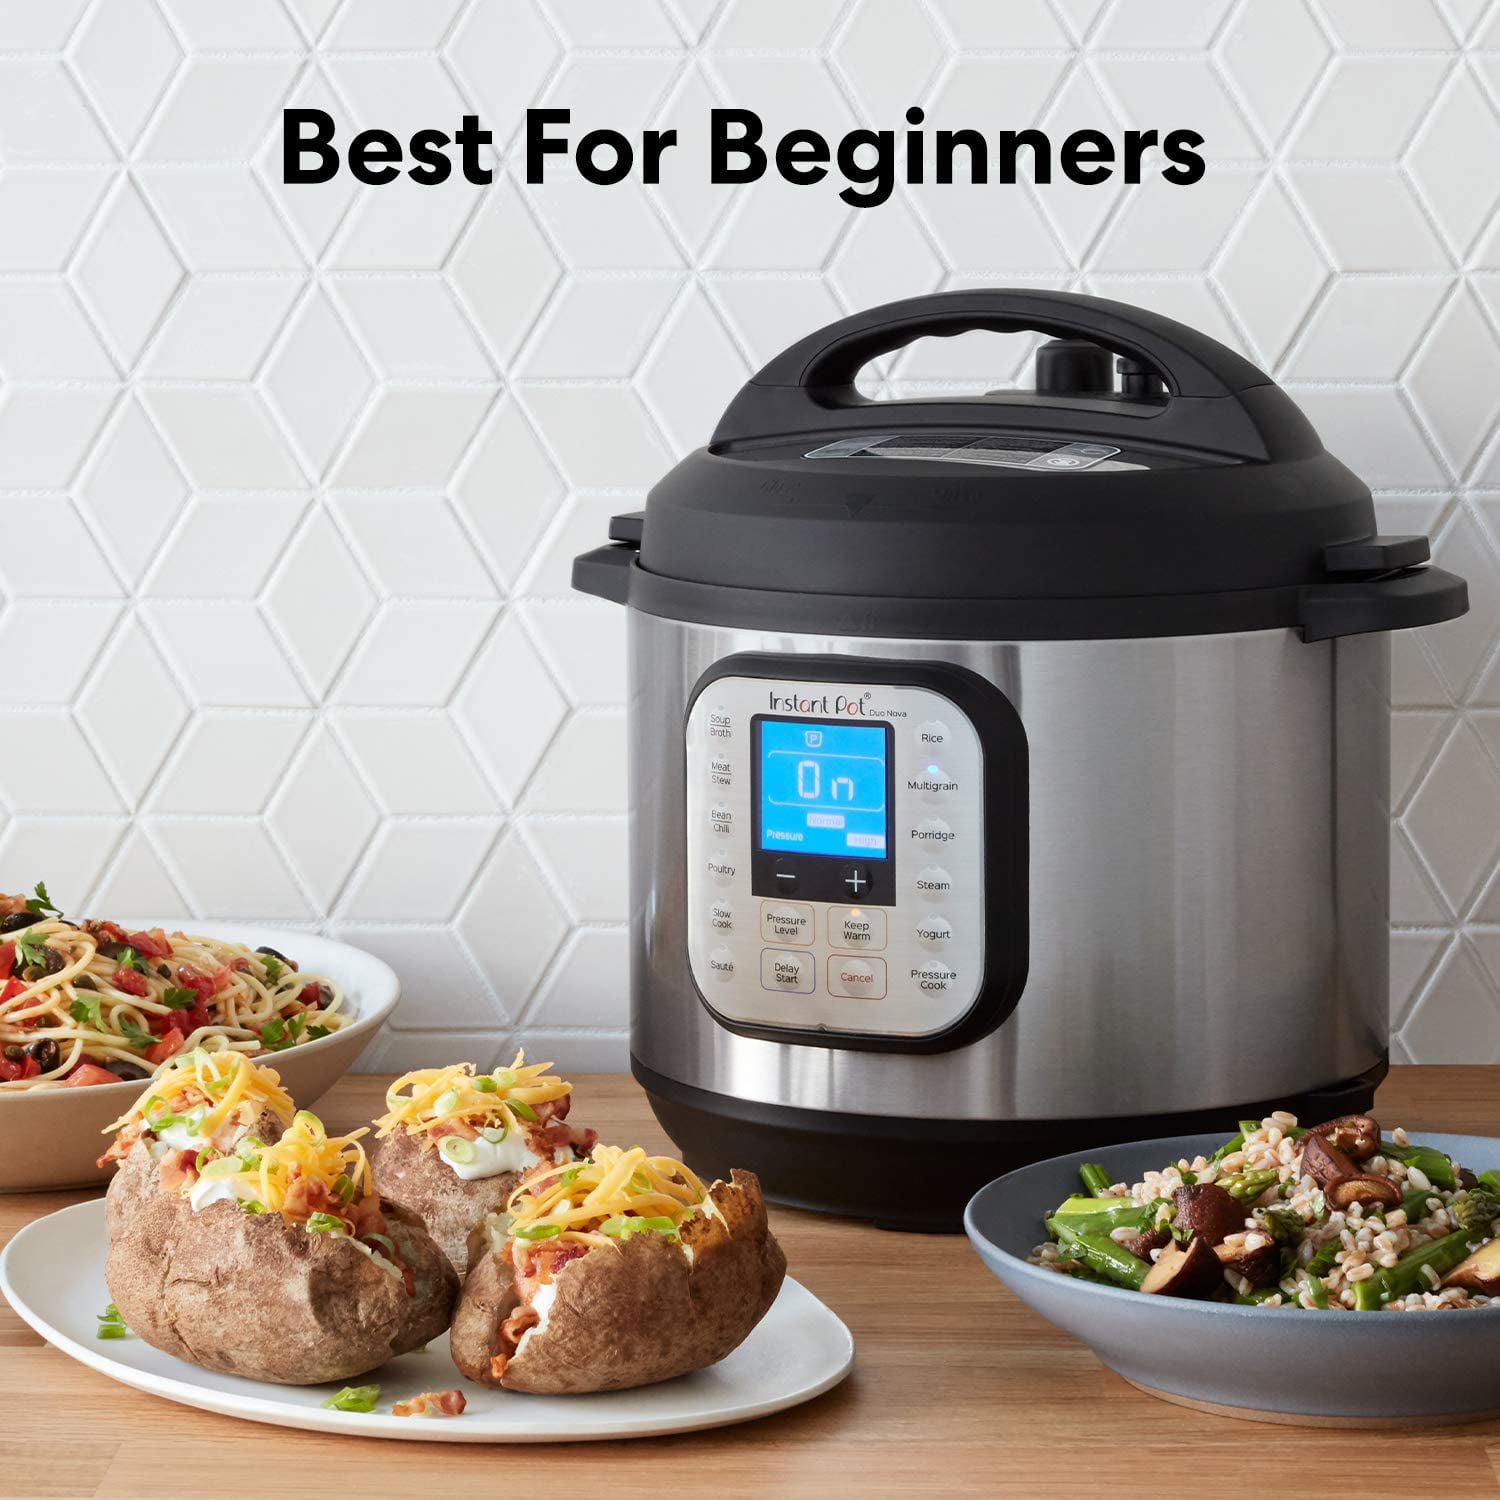 Instant Pot Duo 8 Qt. 7-in-1 Multi-Use Cooker - Brownsboro Hardware & Paint